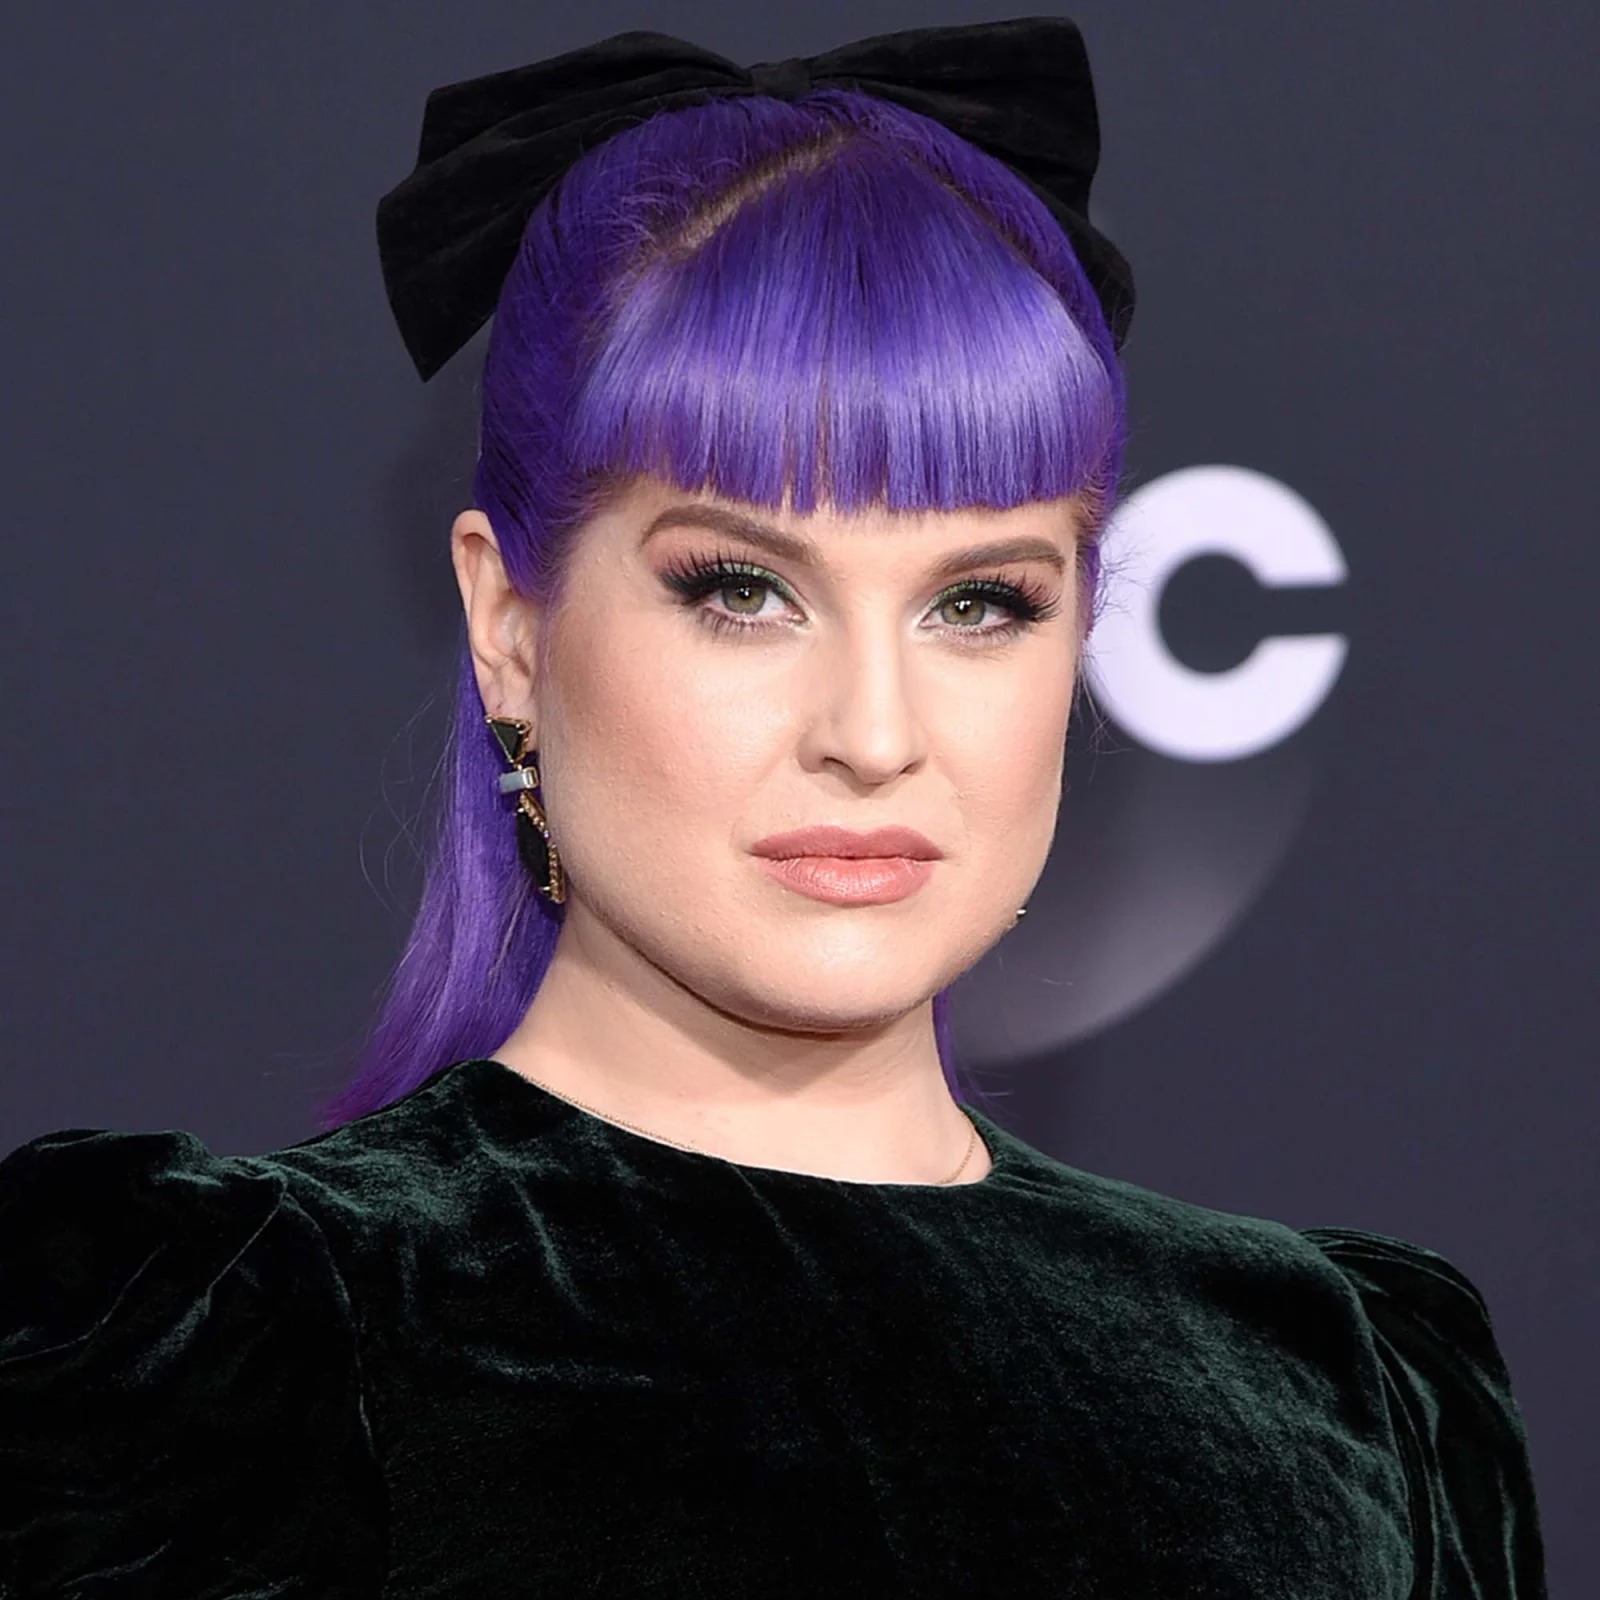 Kelly Osbourne Before and After